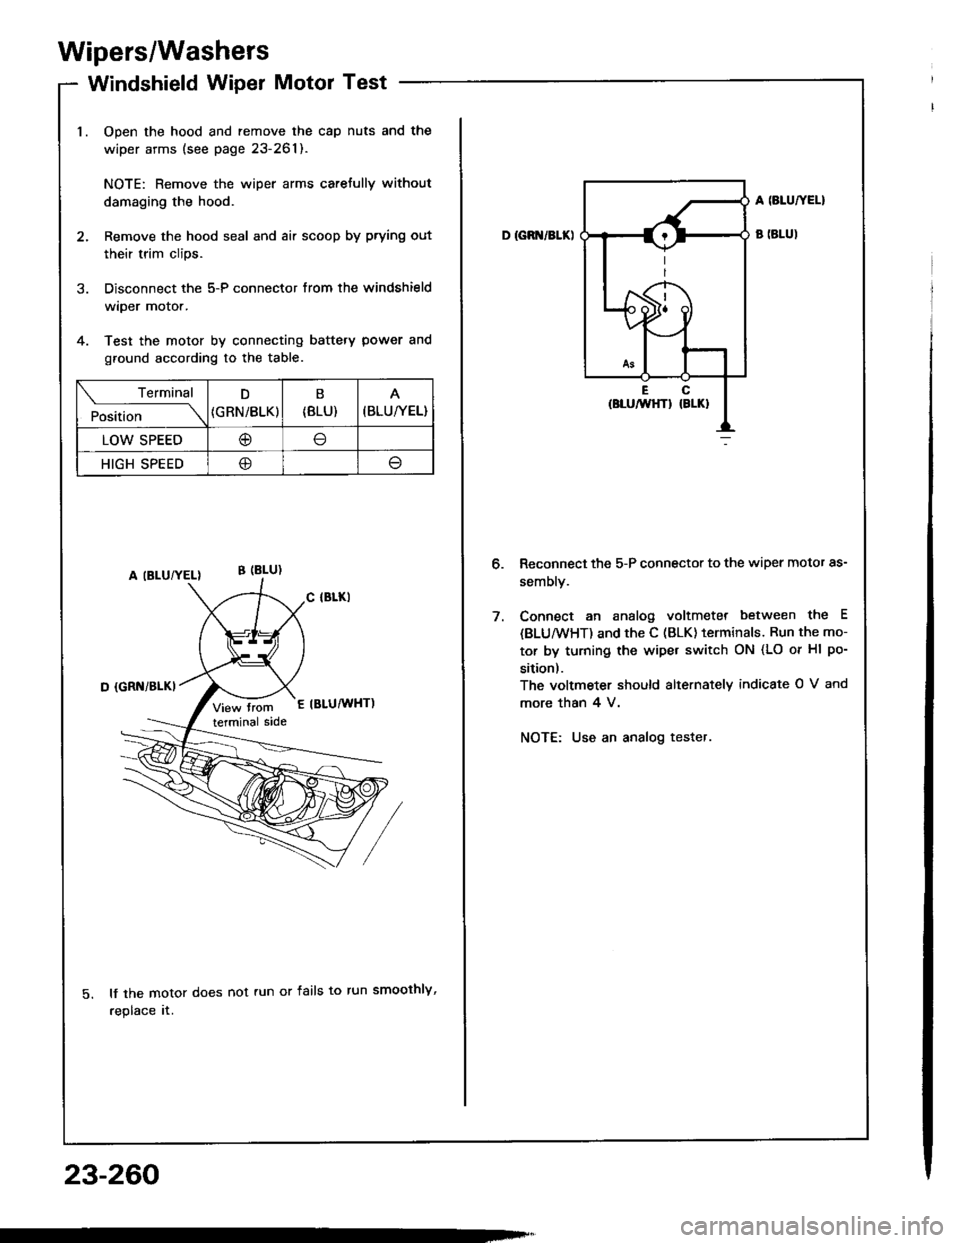 HONDA INTEGRA 1994 4.G User Guide Wipers/Washers
Windshield Wiper Motor Test
Open the hood and remove the cap nuts and the
wiper arms (see page 23-261).
NOTE: Remove the wiper arms carefully without
damaging the hood.
Remove the hood 